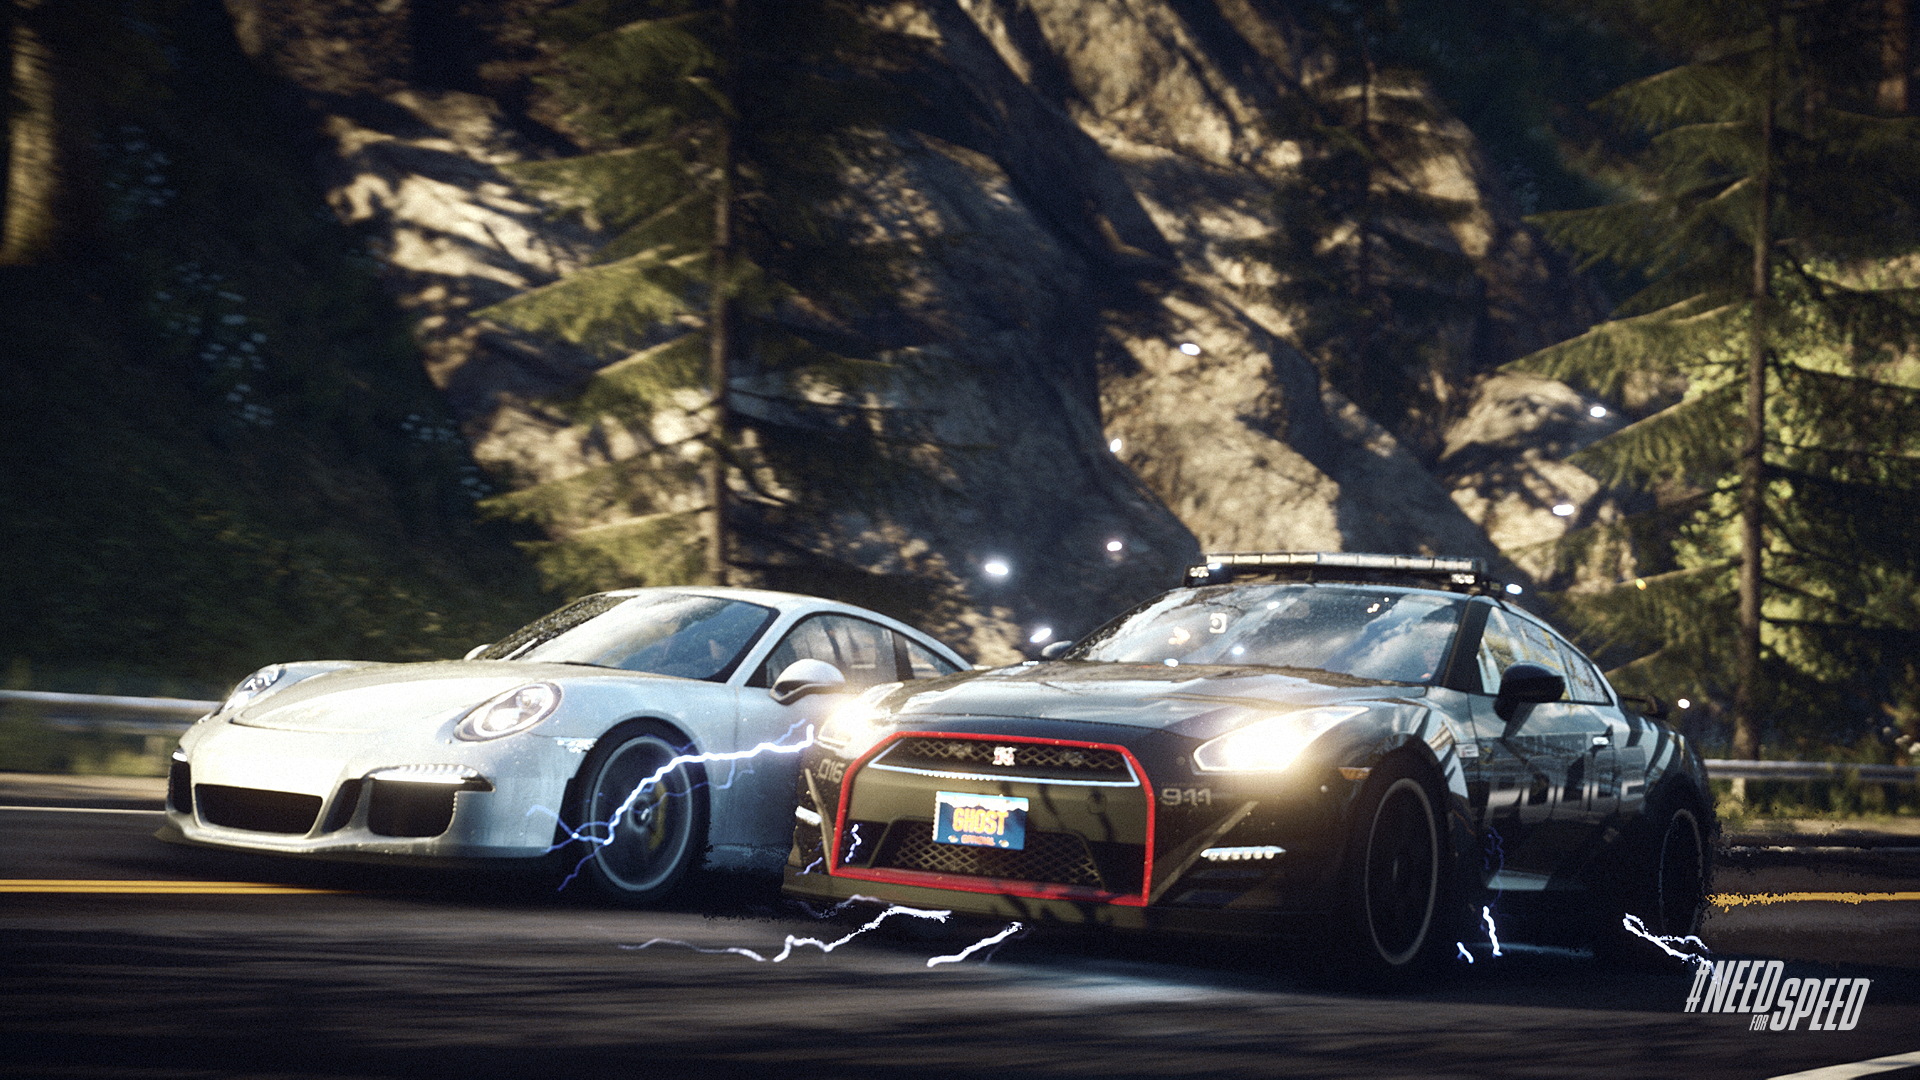 Need for Speed: Rivals Trailer e Gameplay XBOX 360 - XBOX ONE